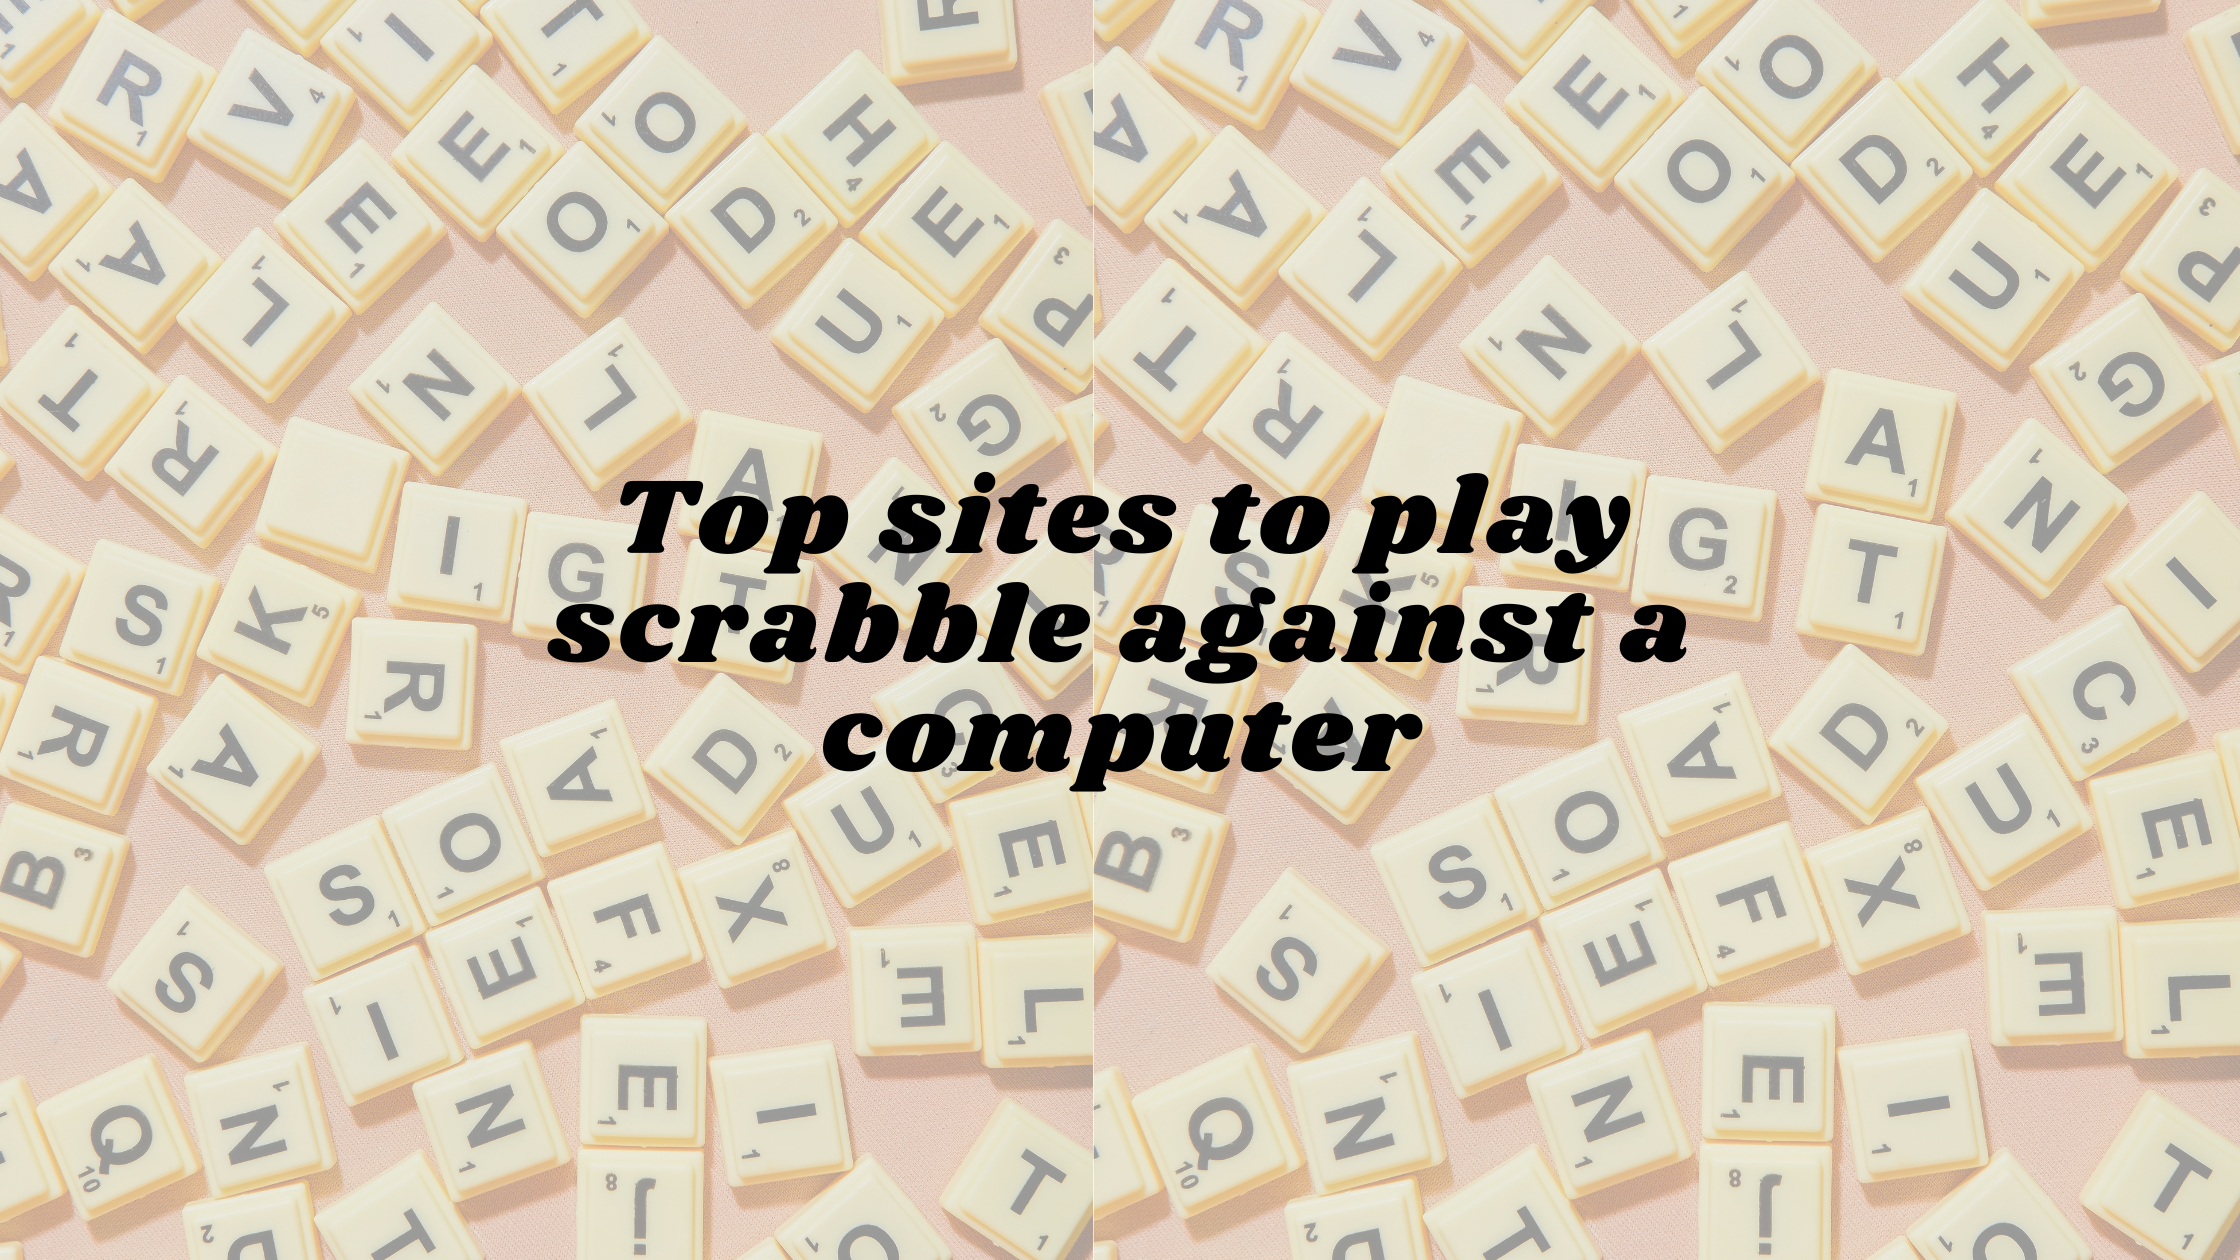 Top sites to play scrabble against a computer